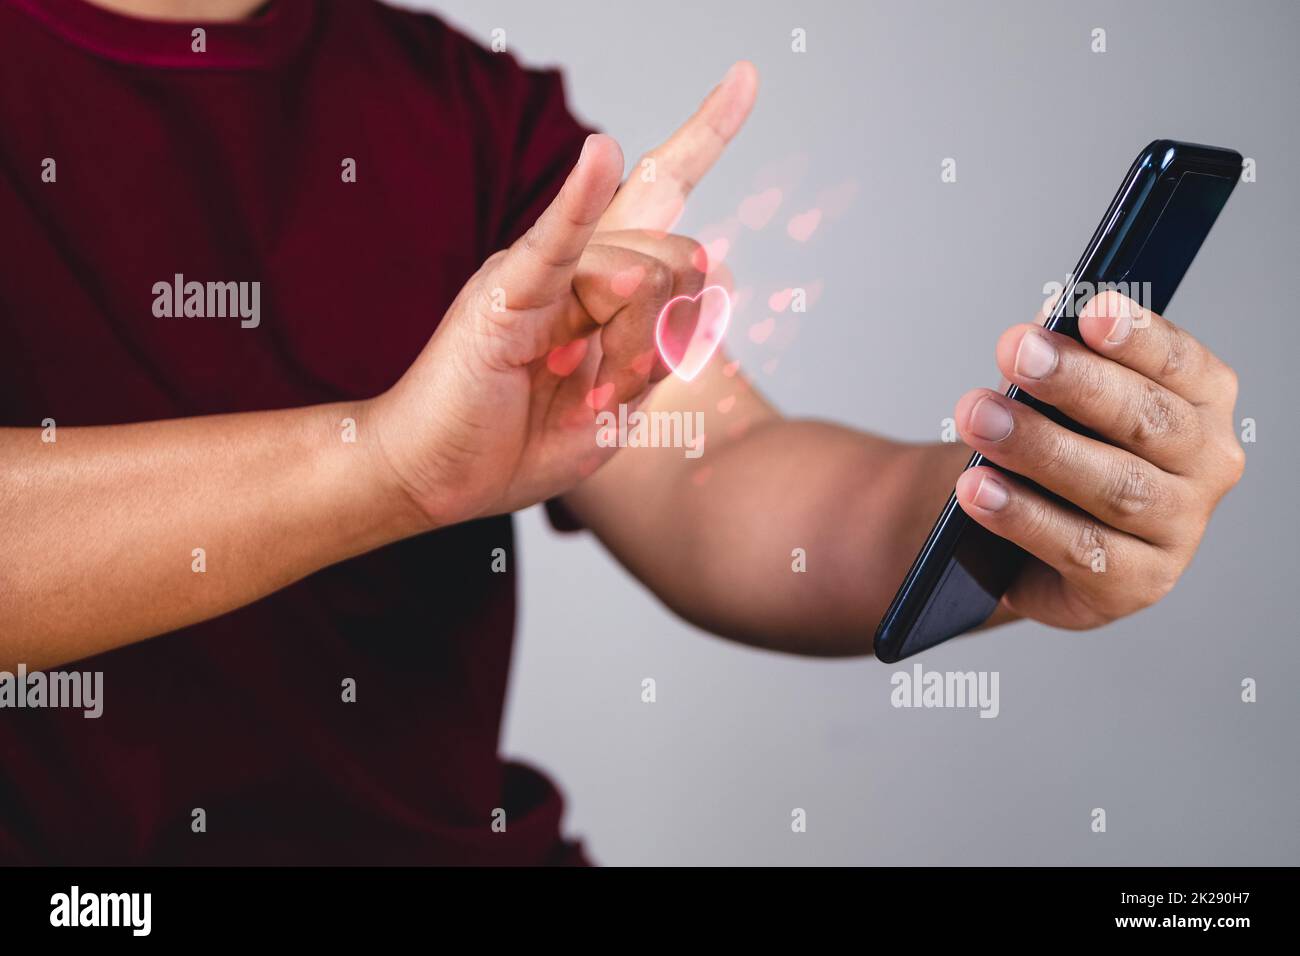 Valentine's day concept. Person uses hand to give love thru a smartphone. Heart shape in visual effect. Stock Photo